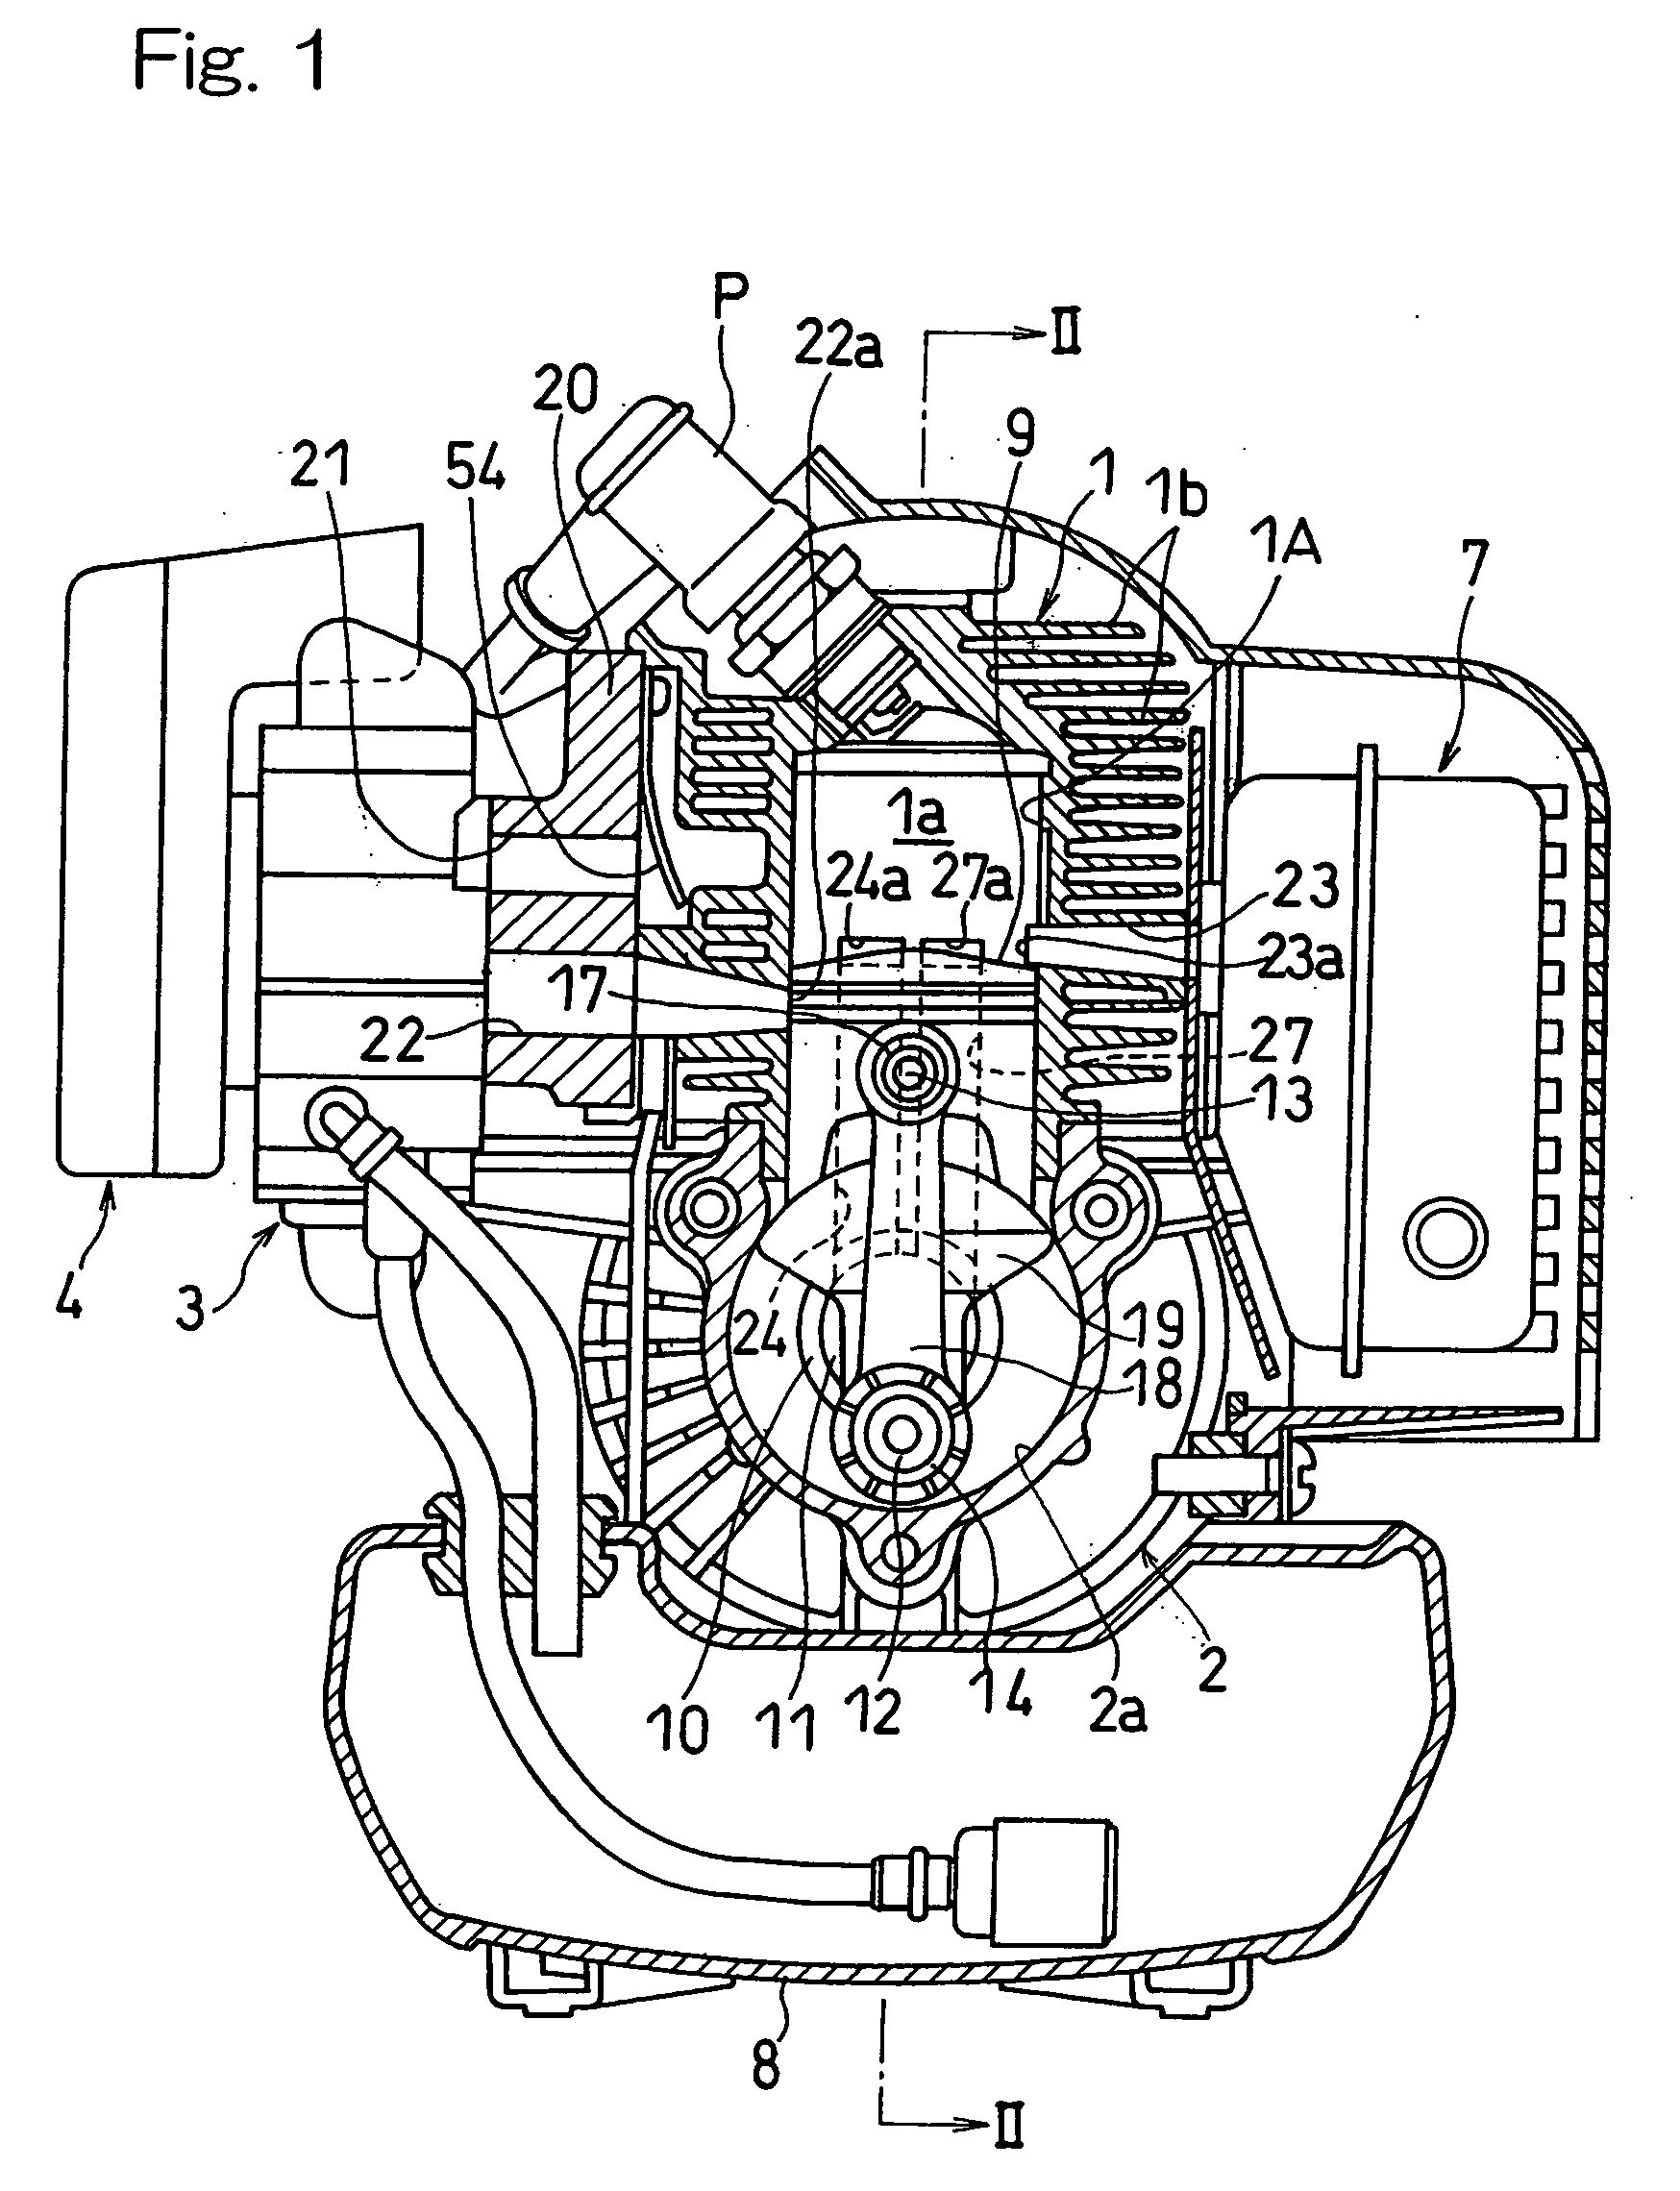 Two-cycle combustion engine